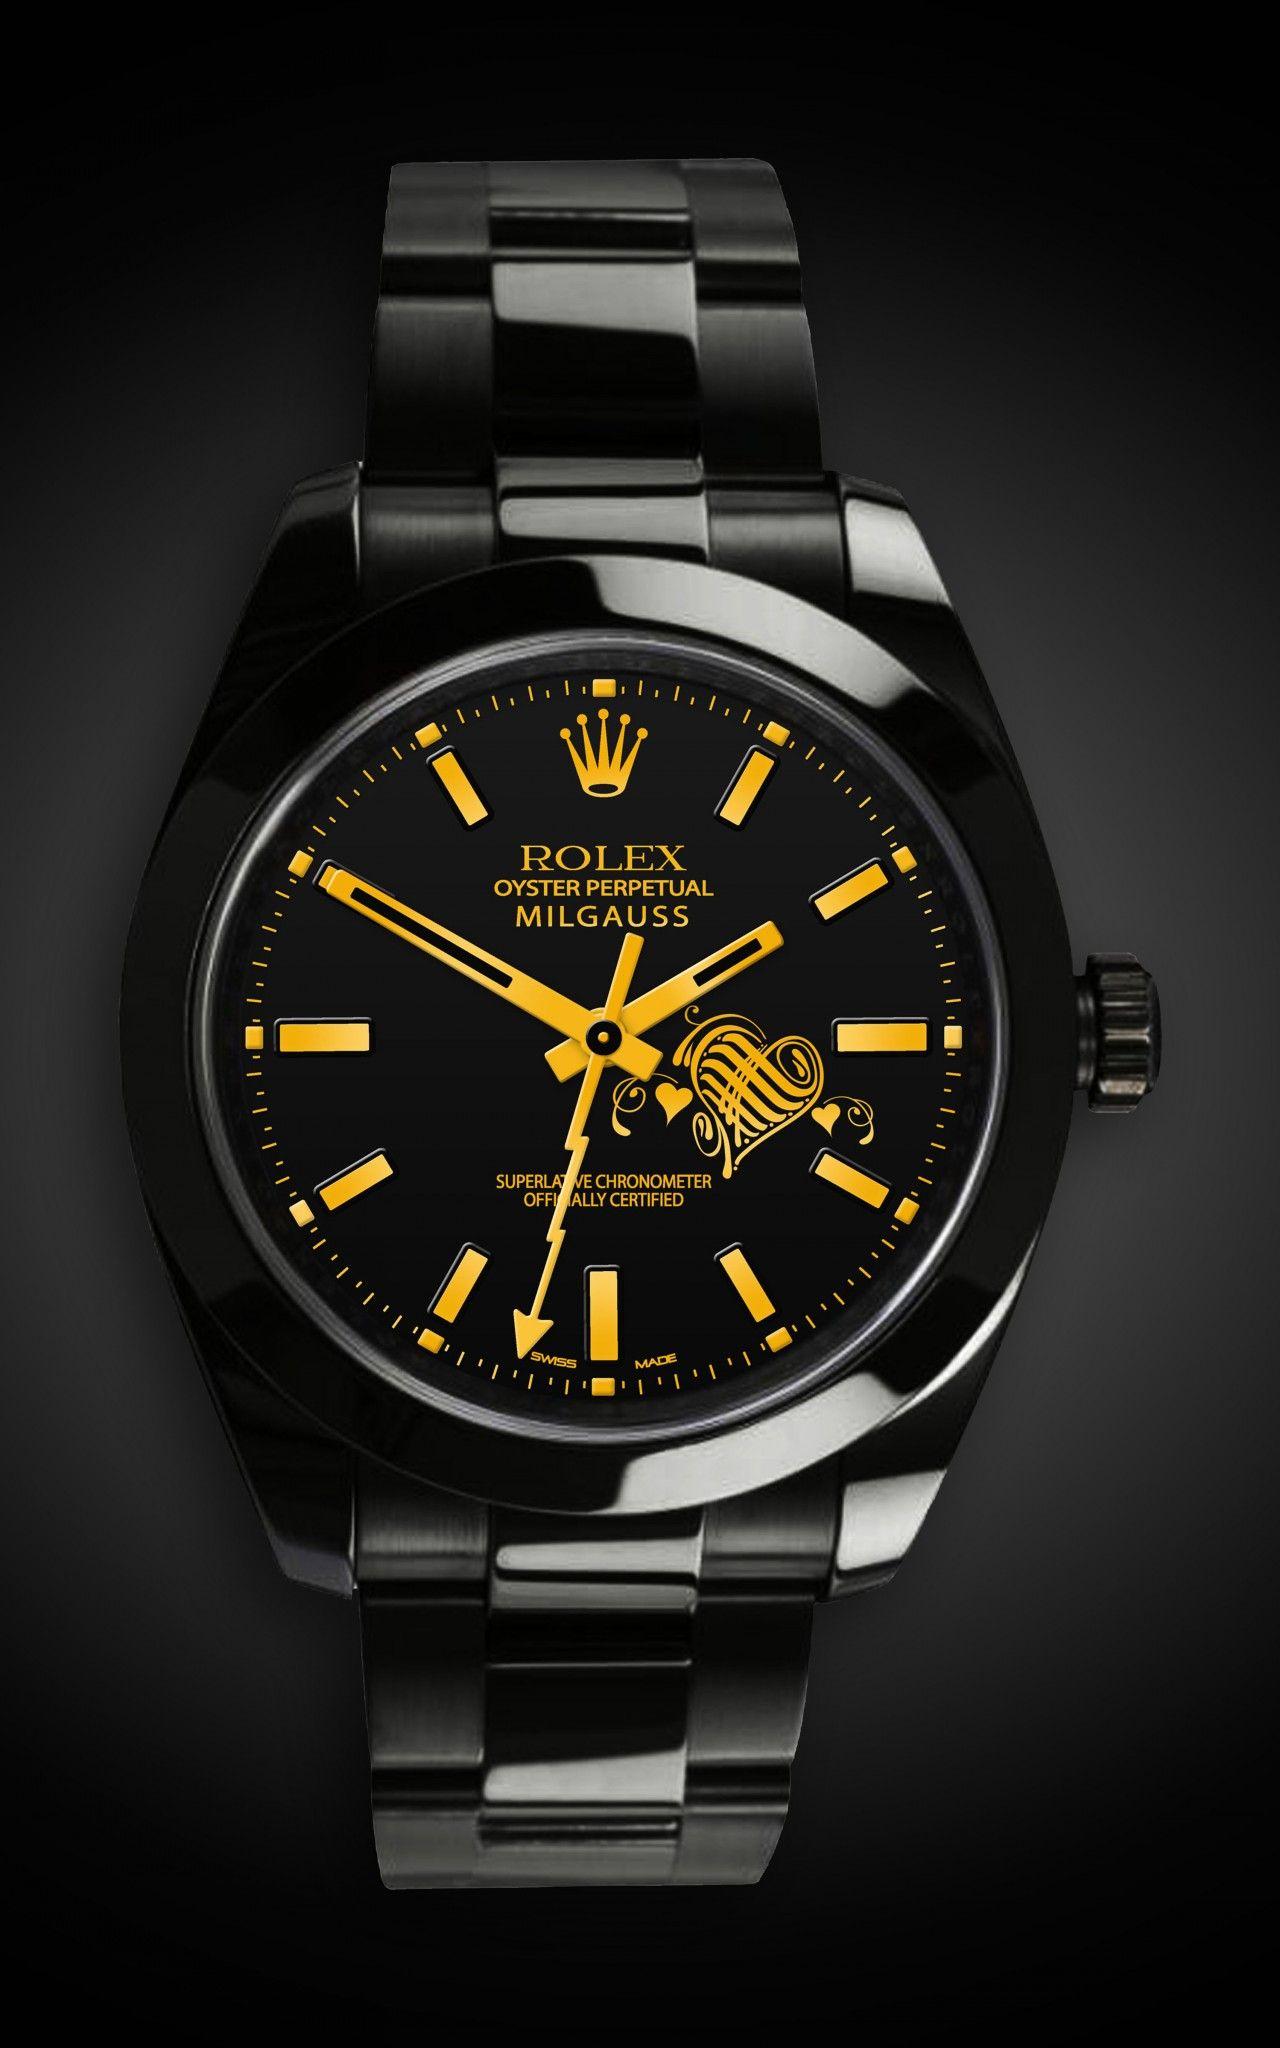 HD Rolex Wallpaper and Photo. HD Products Wallpaper